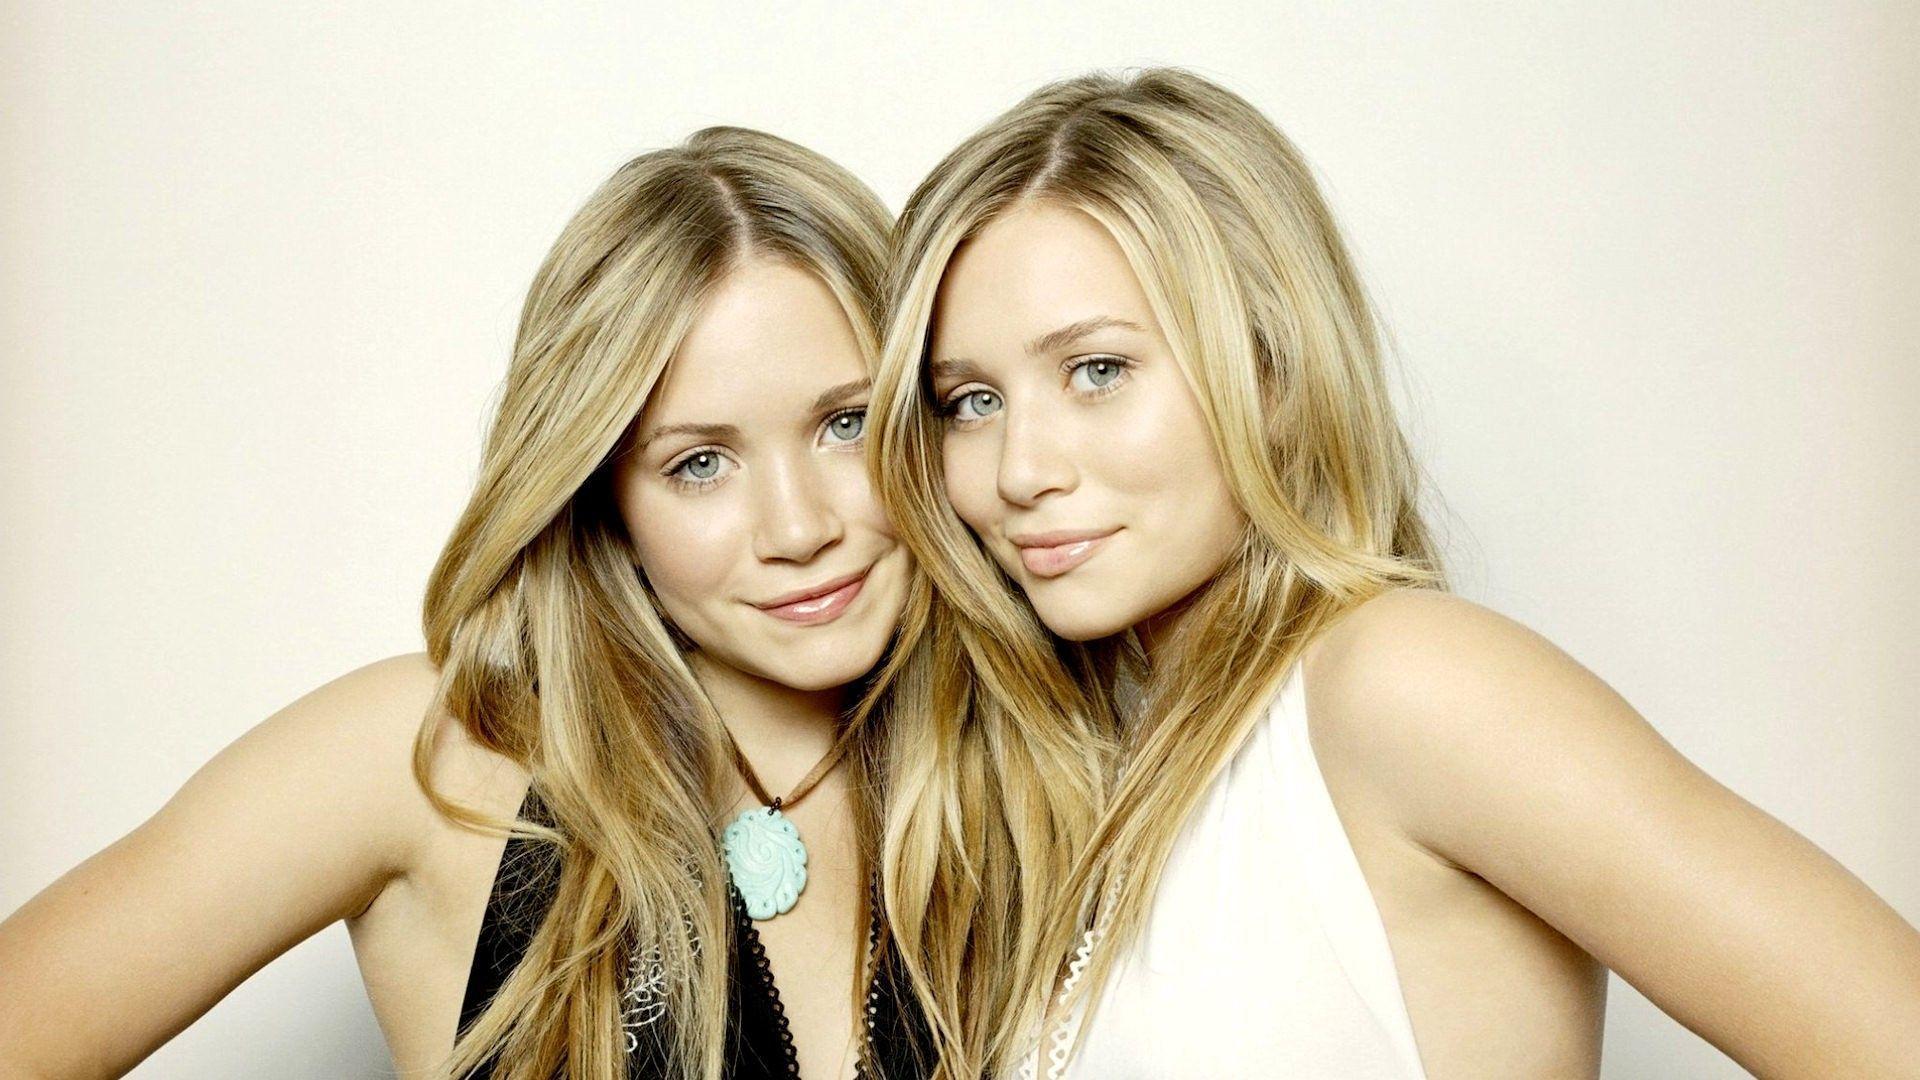 Sexy Pictures Of The Olsen Twins.